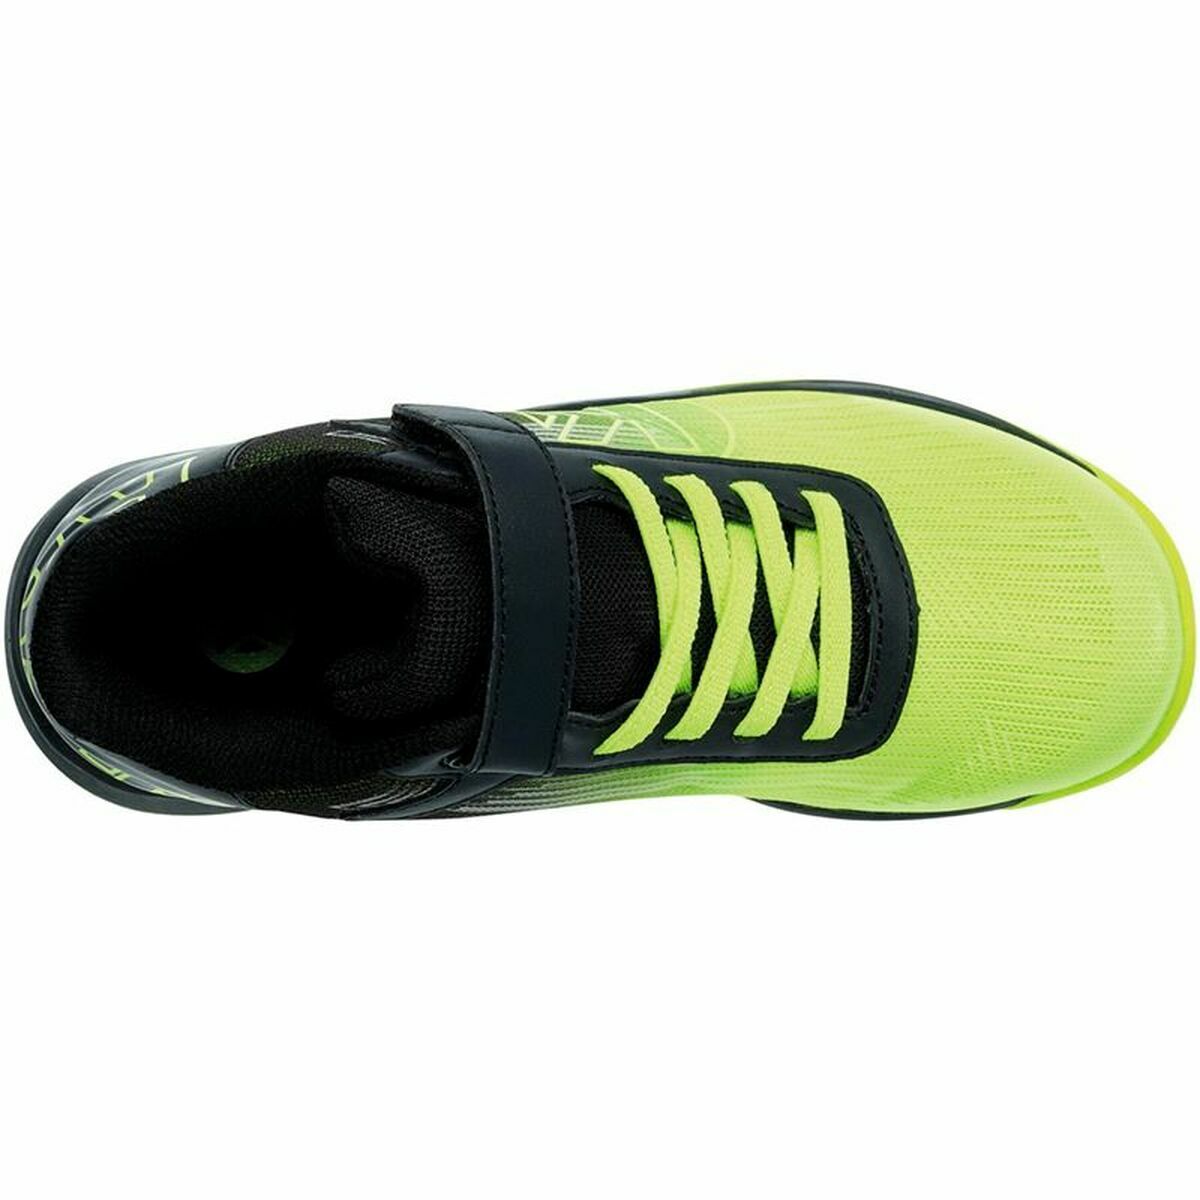 Sports Shoes for Kids Kempa Attack 2.0